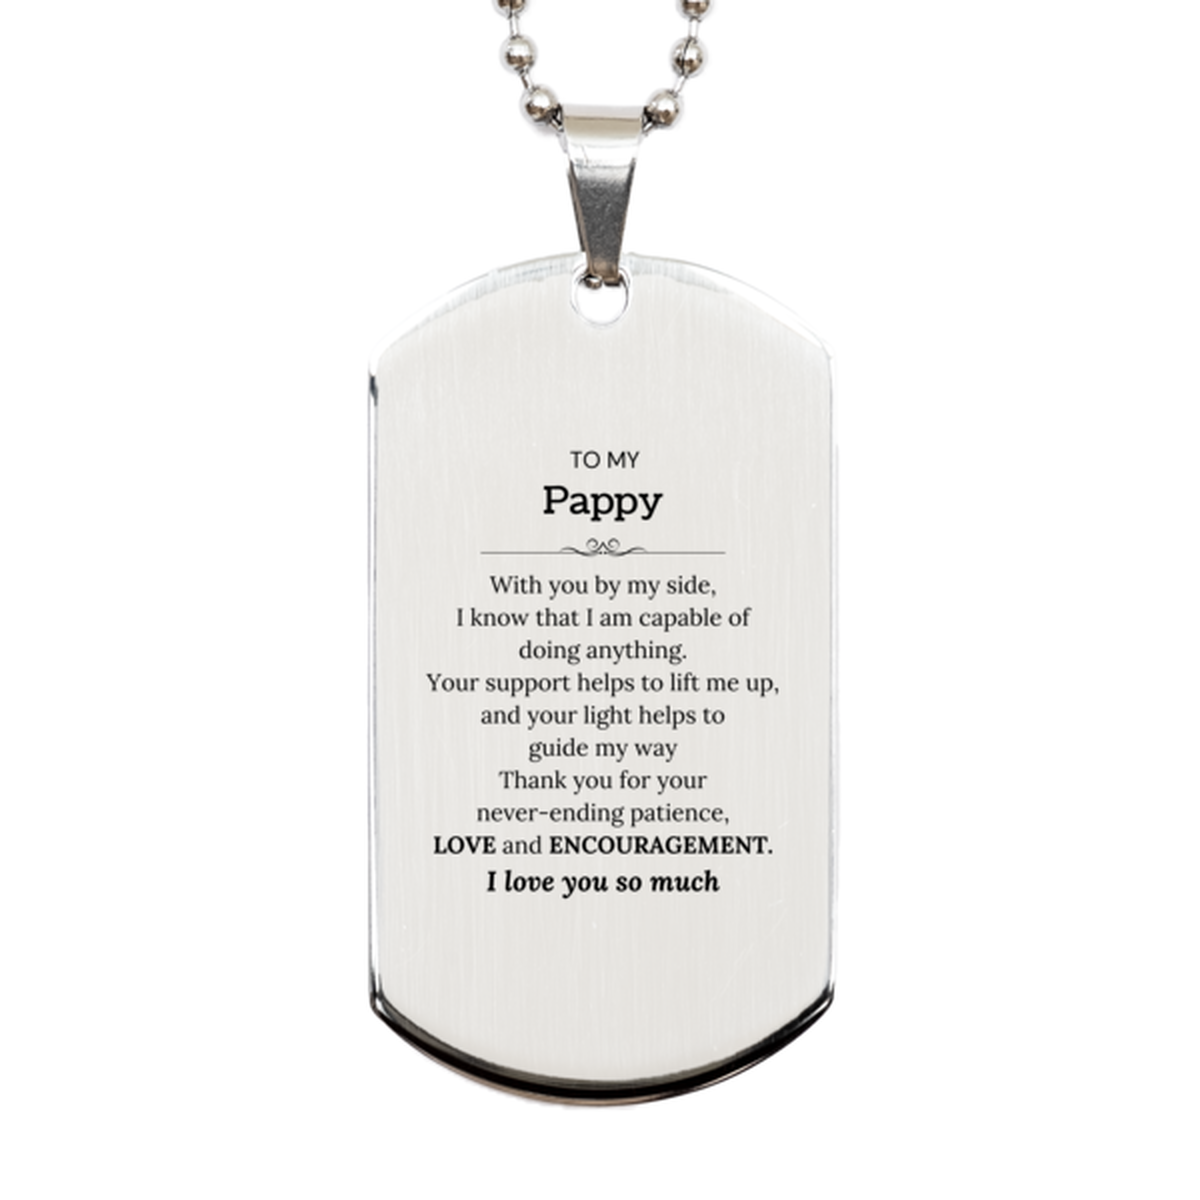 Appreciation Pappy Silver Dog Tag Gifts, To My Pappy Birthday Christmas Wedding Keepsake Gifts for Pappy With you by my side, I know that I am capable of doing anything. I love you so much